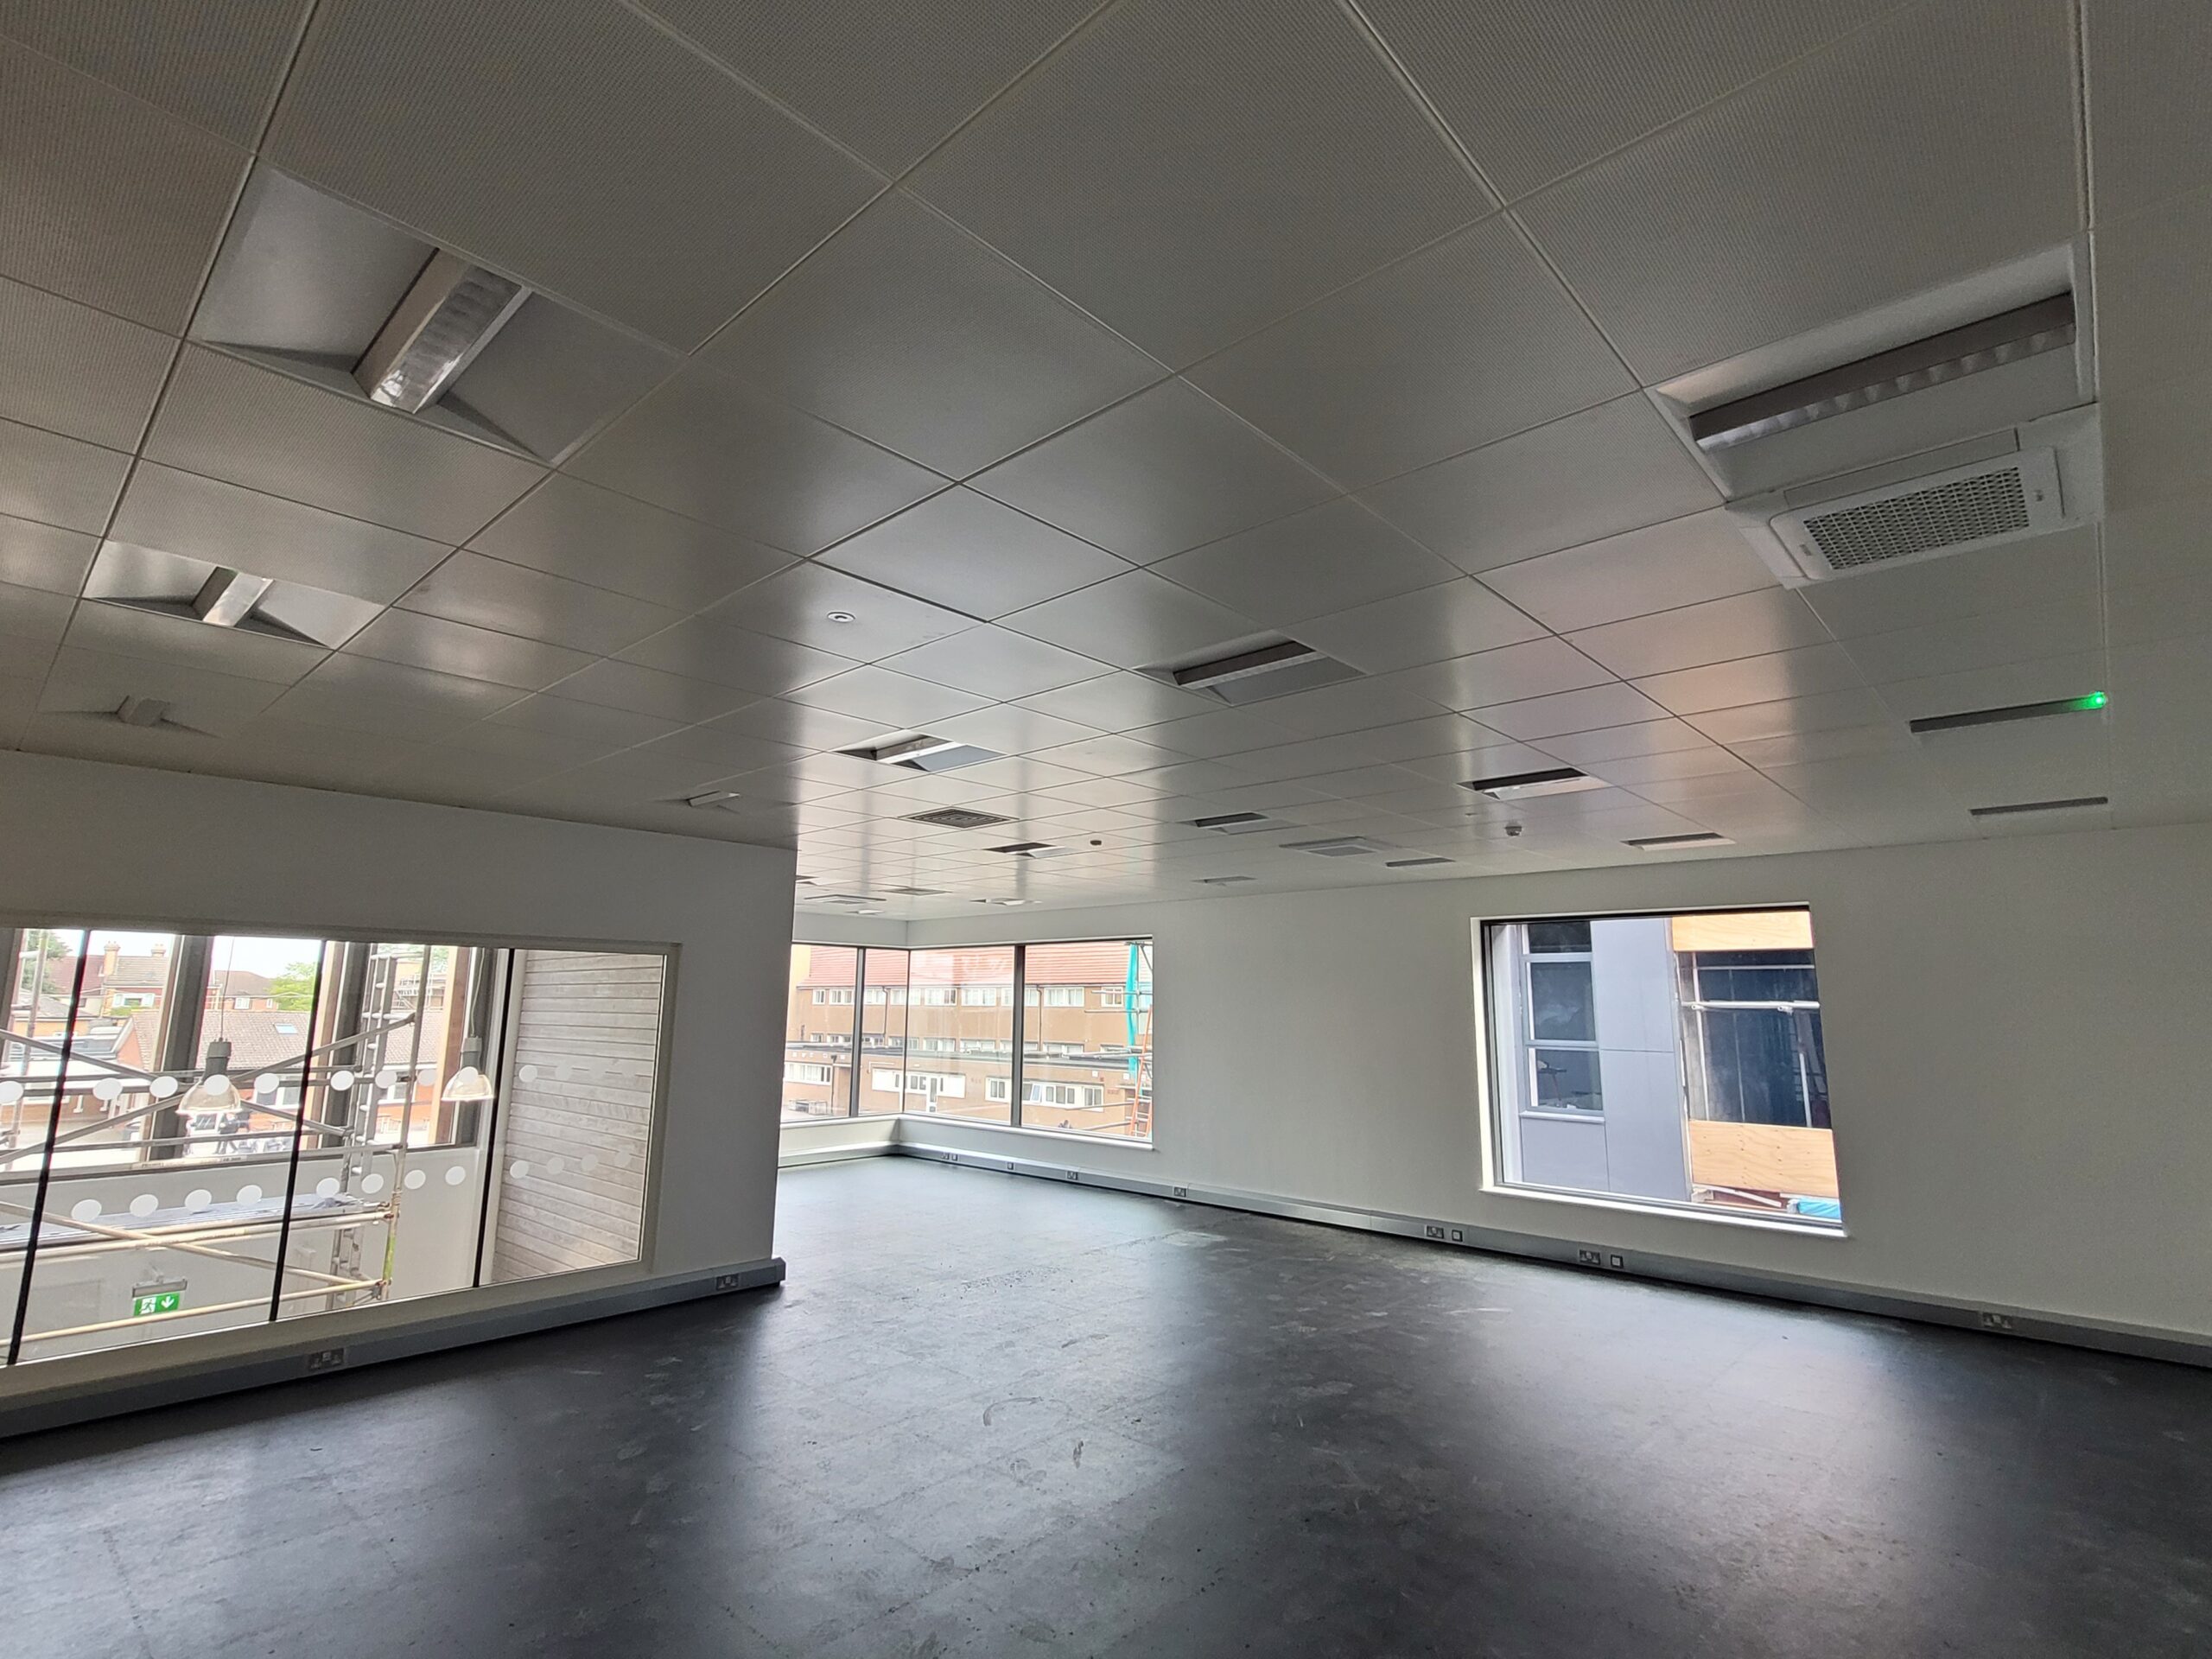 A new suspended ceiling inside a large office building.